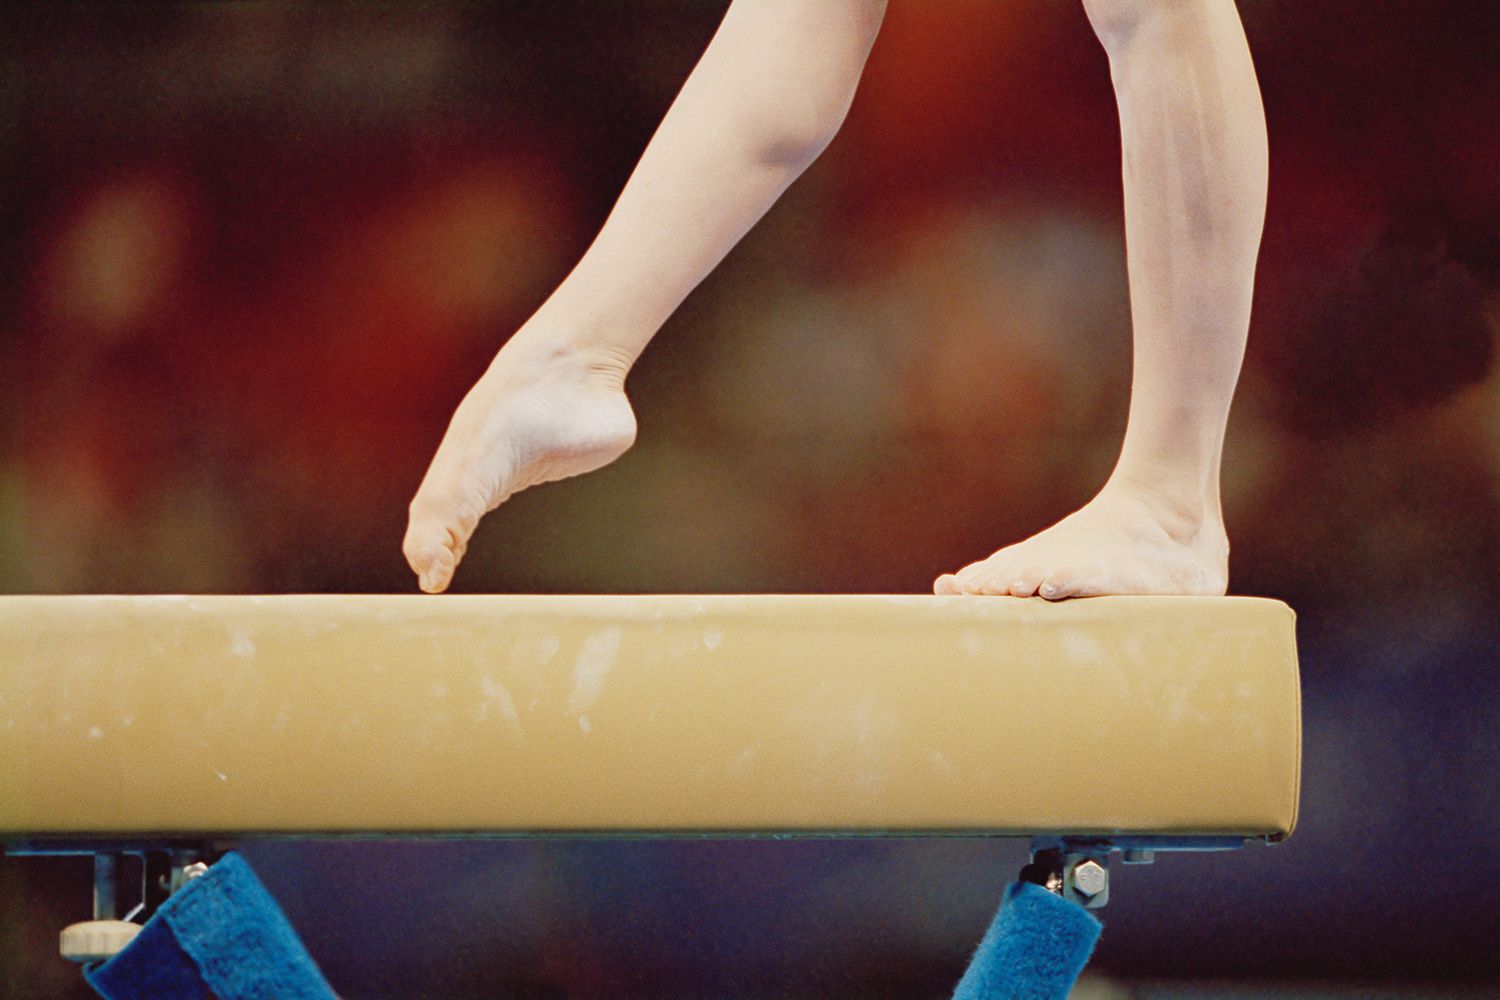 Gymnast on balance beam, low section, close-up